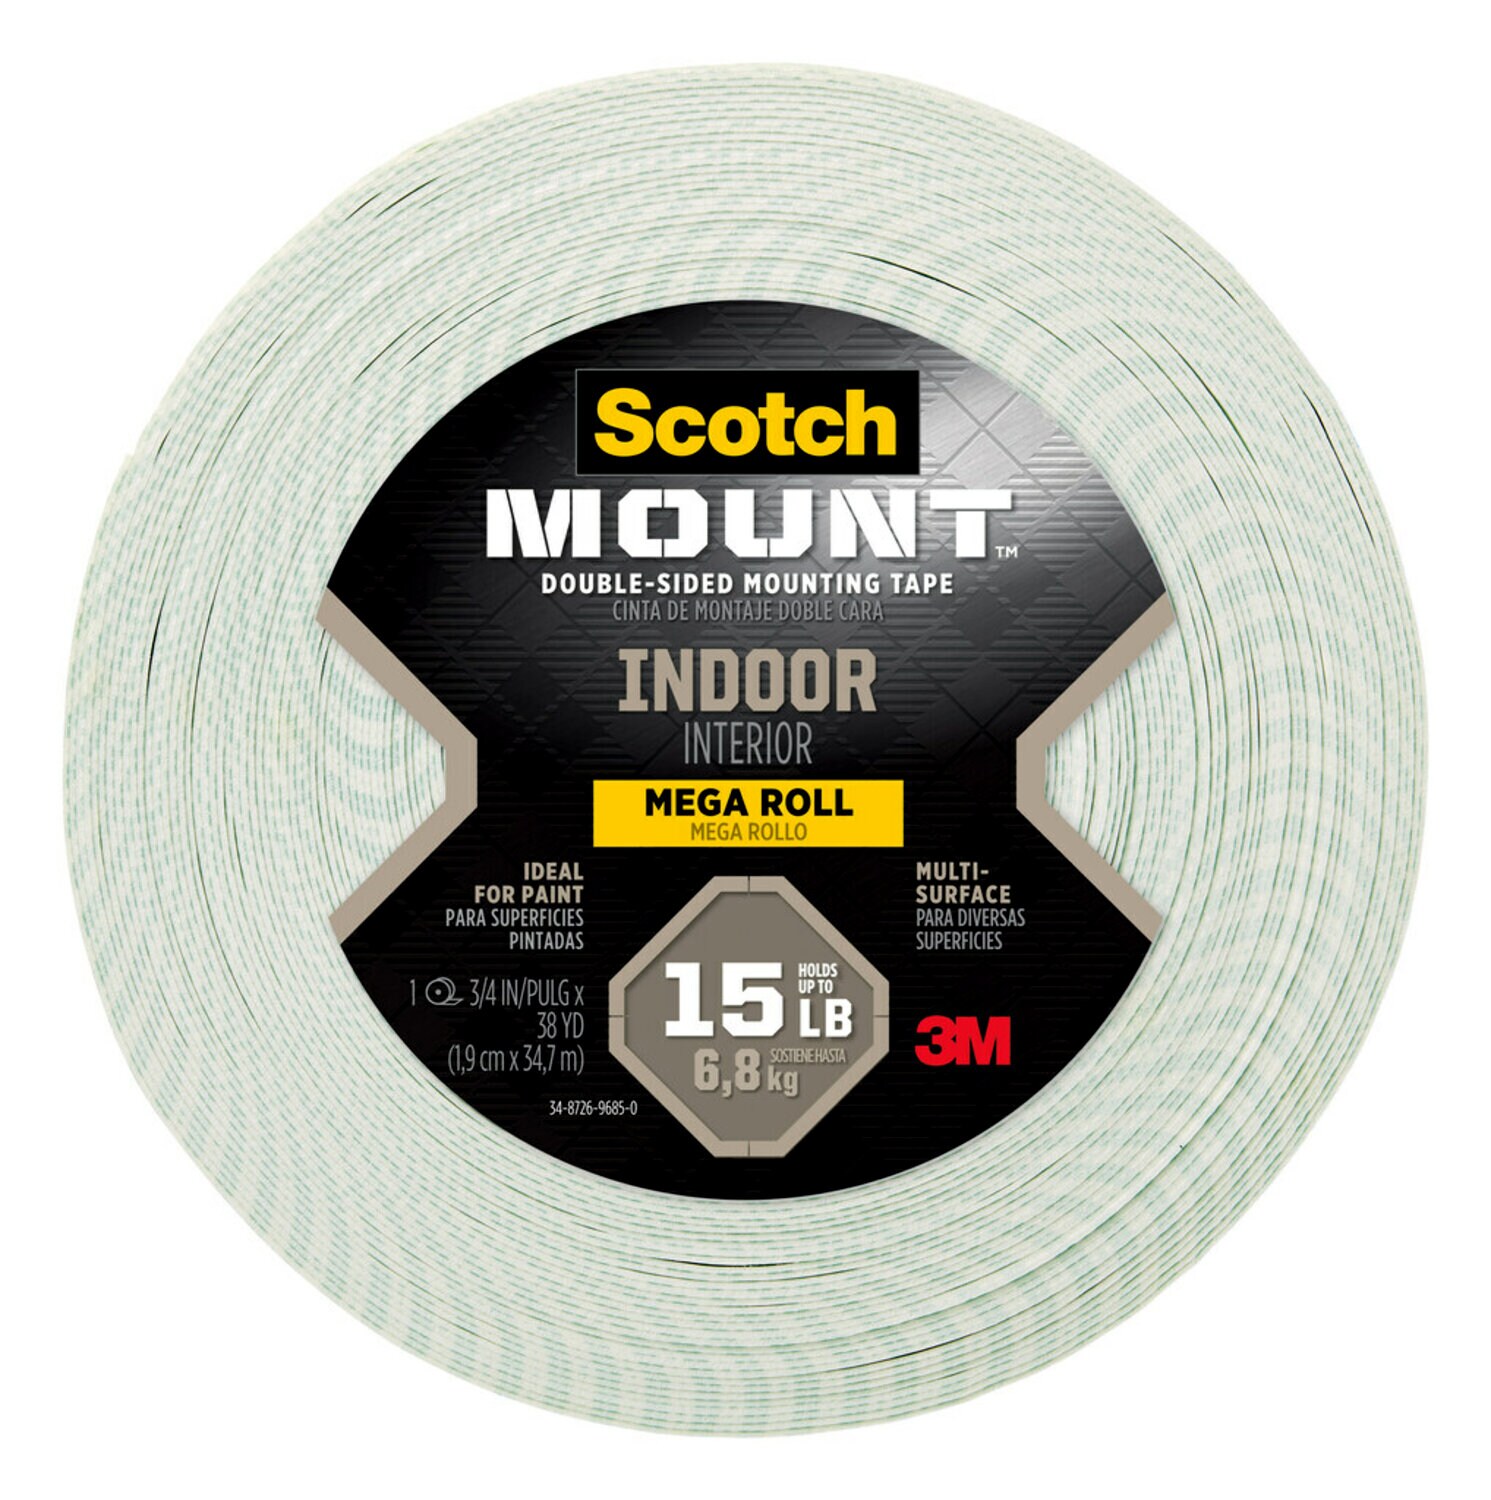 7100250334 - Scotch-Mount Indoor Double-Sided Mounting Tape 110H-MR, 3/4 in x 38 yd (1.9 cm x 34.75 m)